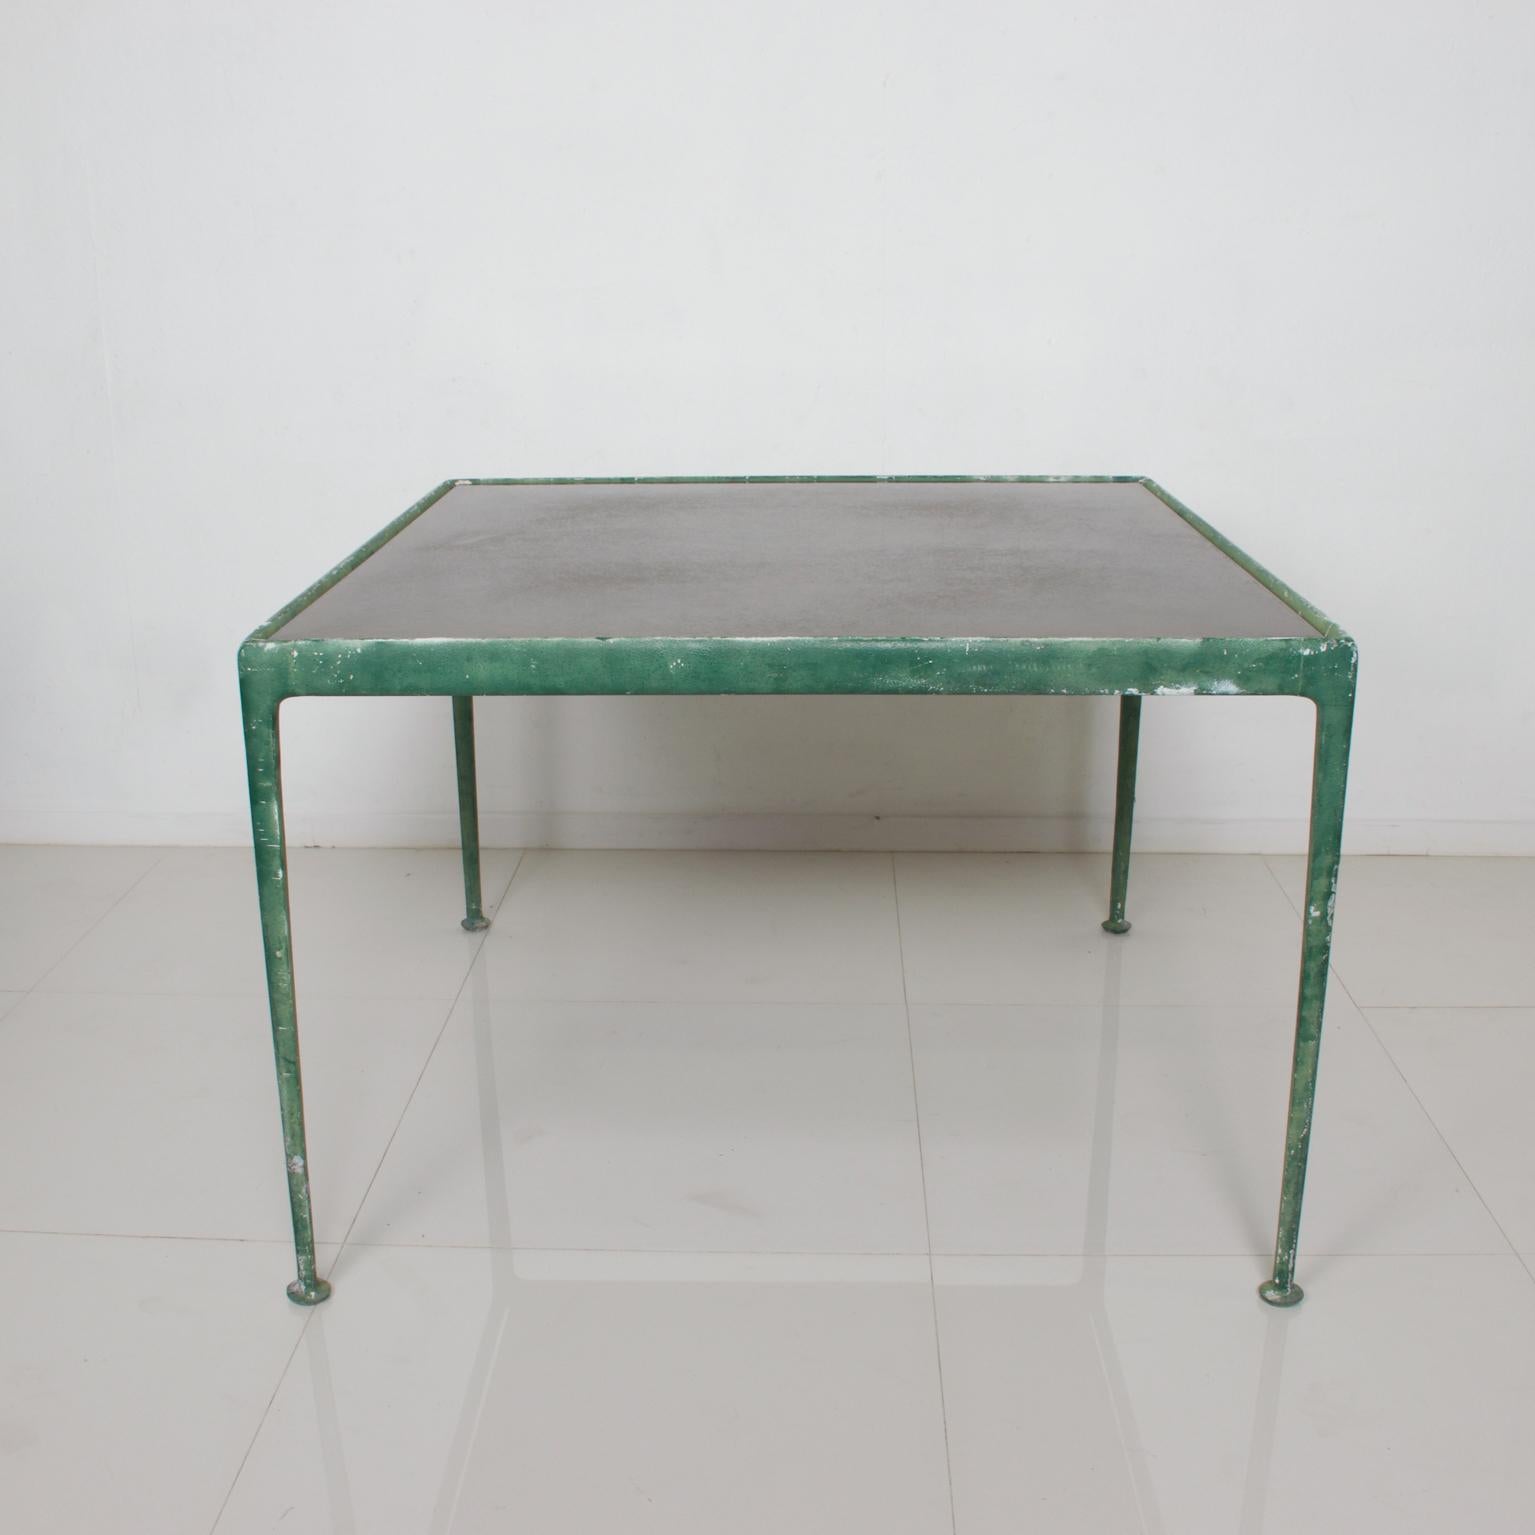 For your consideration: Outdoor vintage metal table by Richard Schultz, patio dining table for Knoll, circa 1960s, 